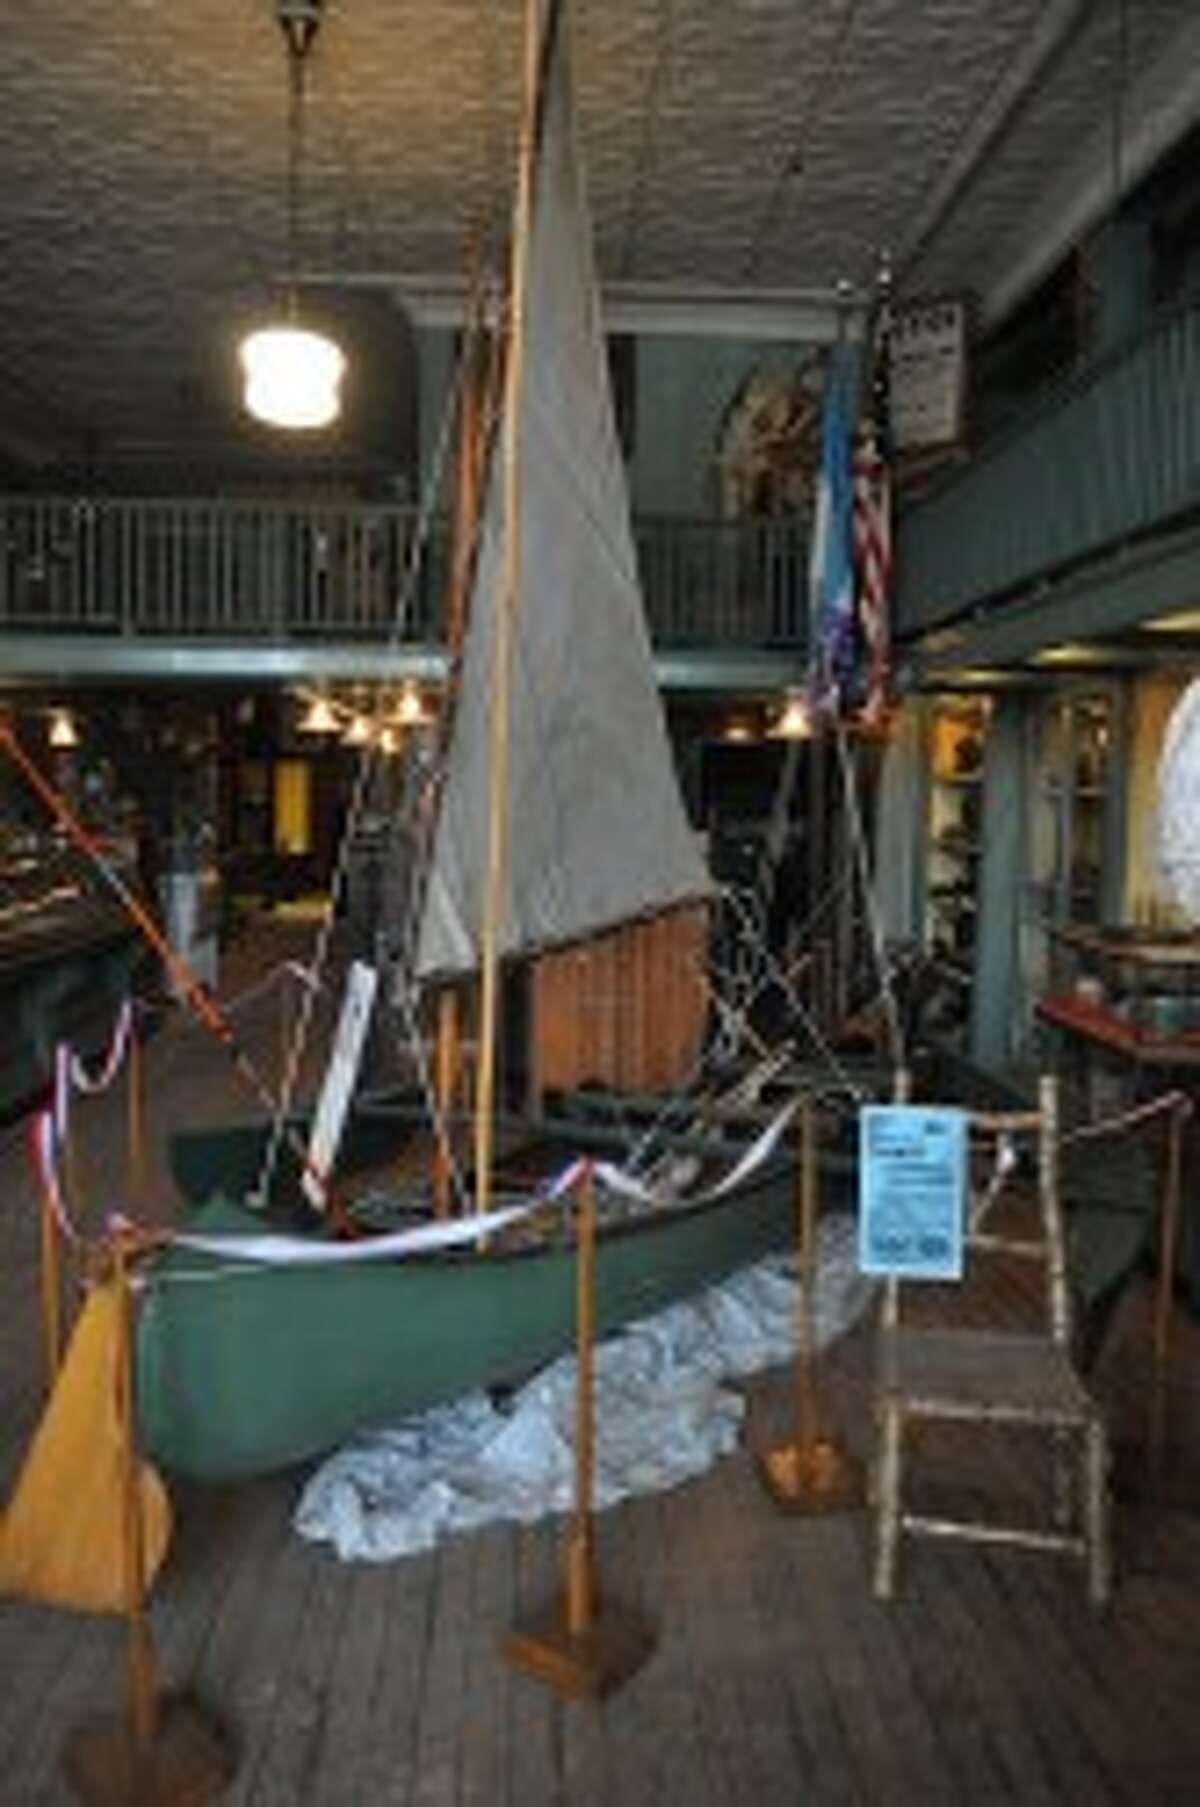 A canoe that was rigged by Wilcox Doolittle and used in Portage Lake in the 1950s is on display at the Manistee County Historical Museum.